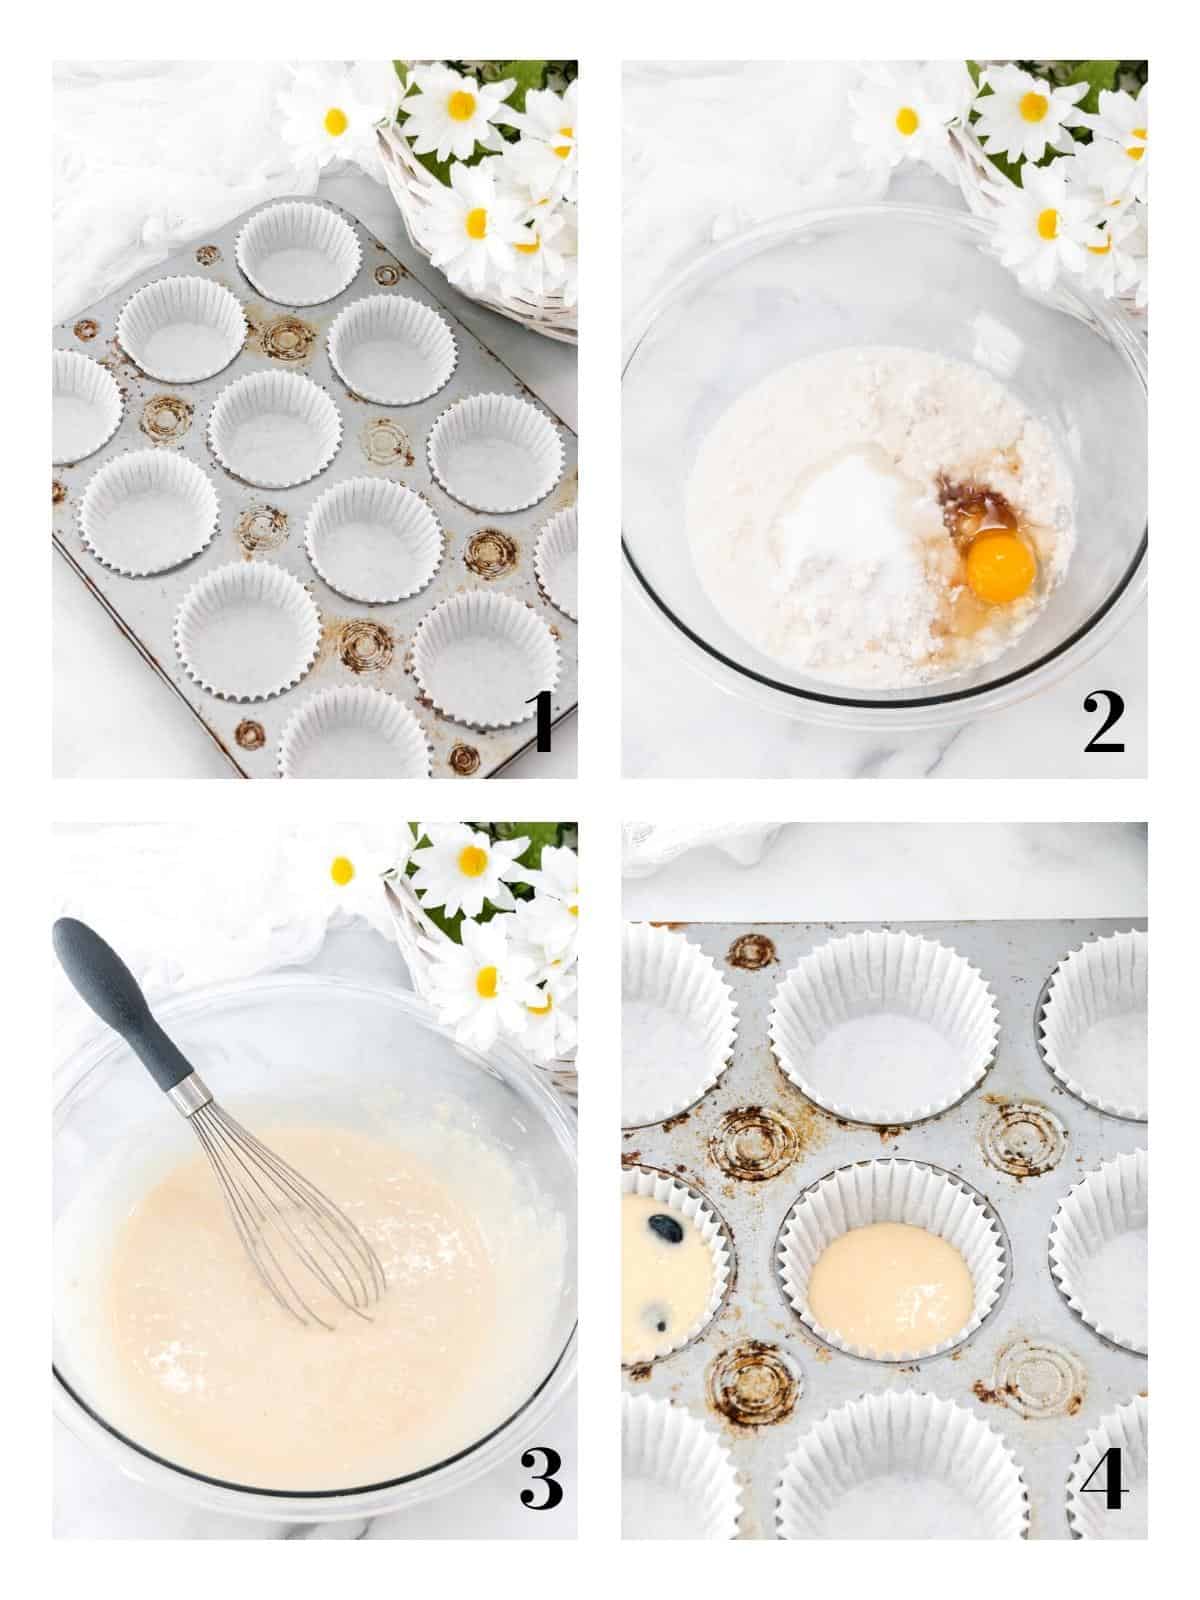 Collage of mixing muffin batter.